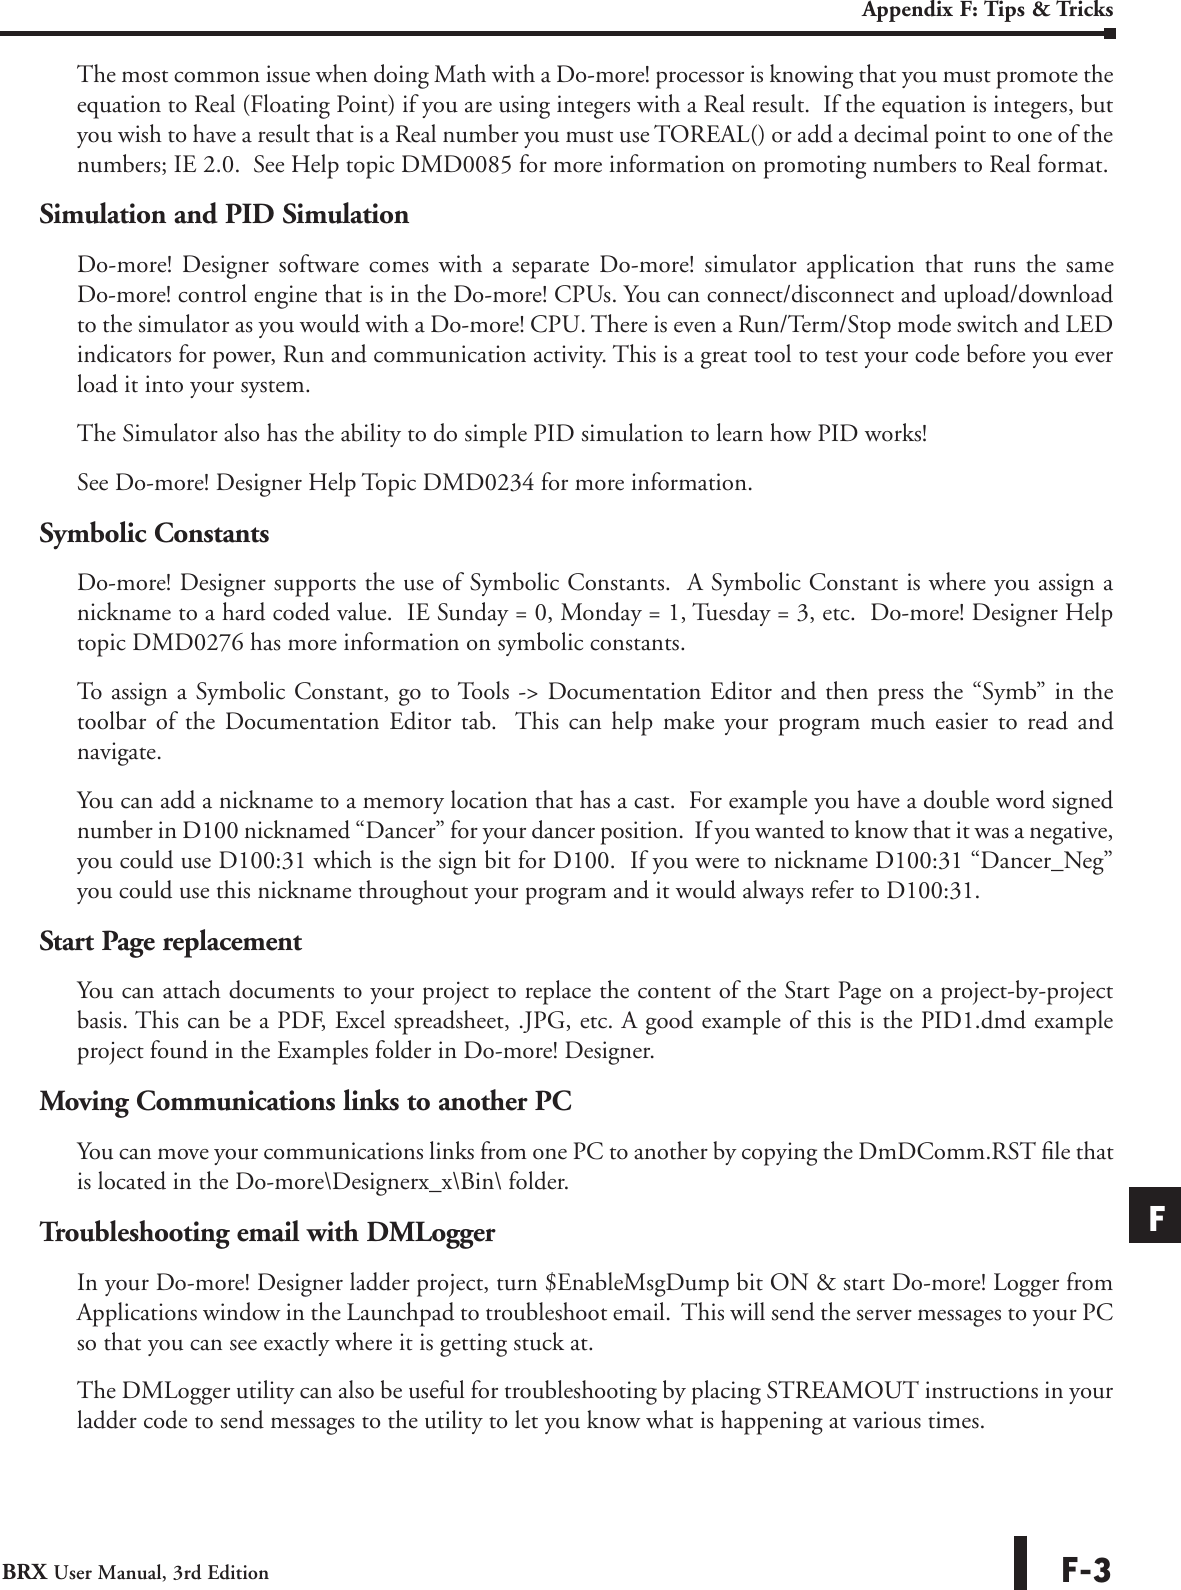 Page 3 of 8 - BRX User Manual, 3rd Edition Appendix F Appxf